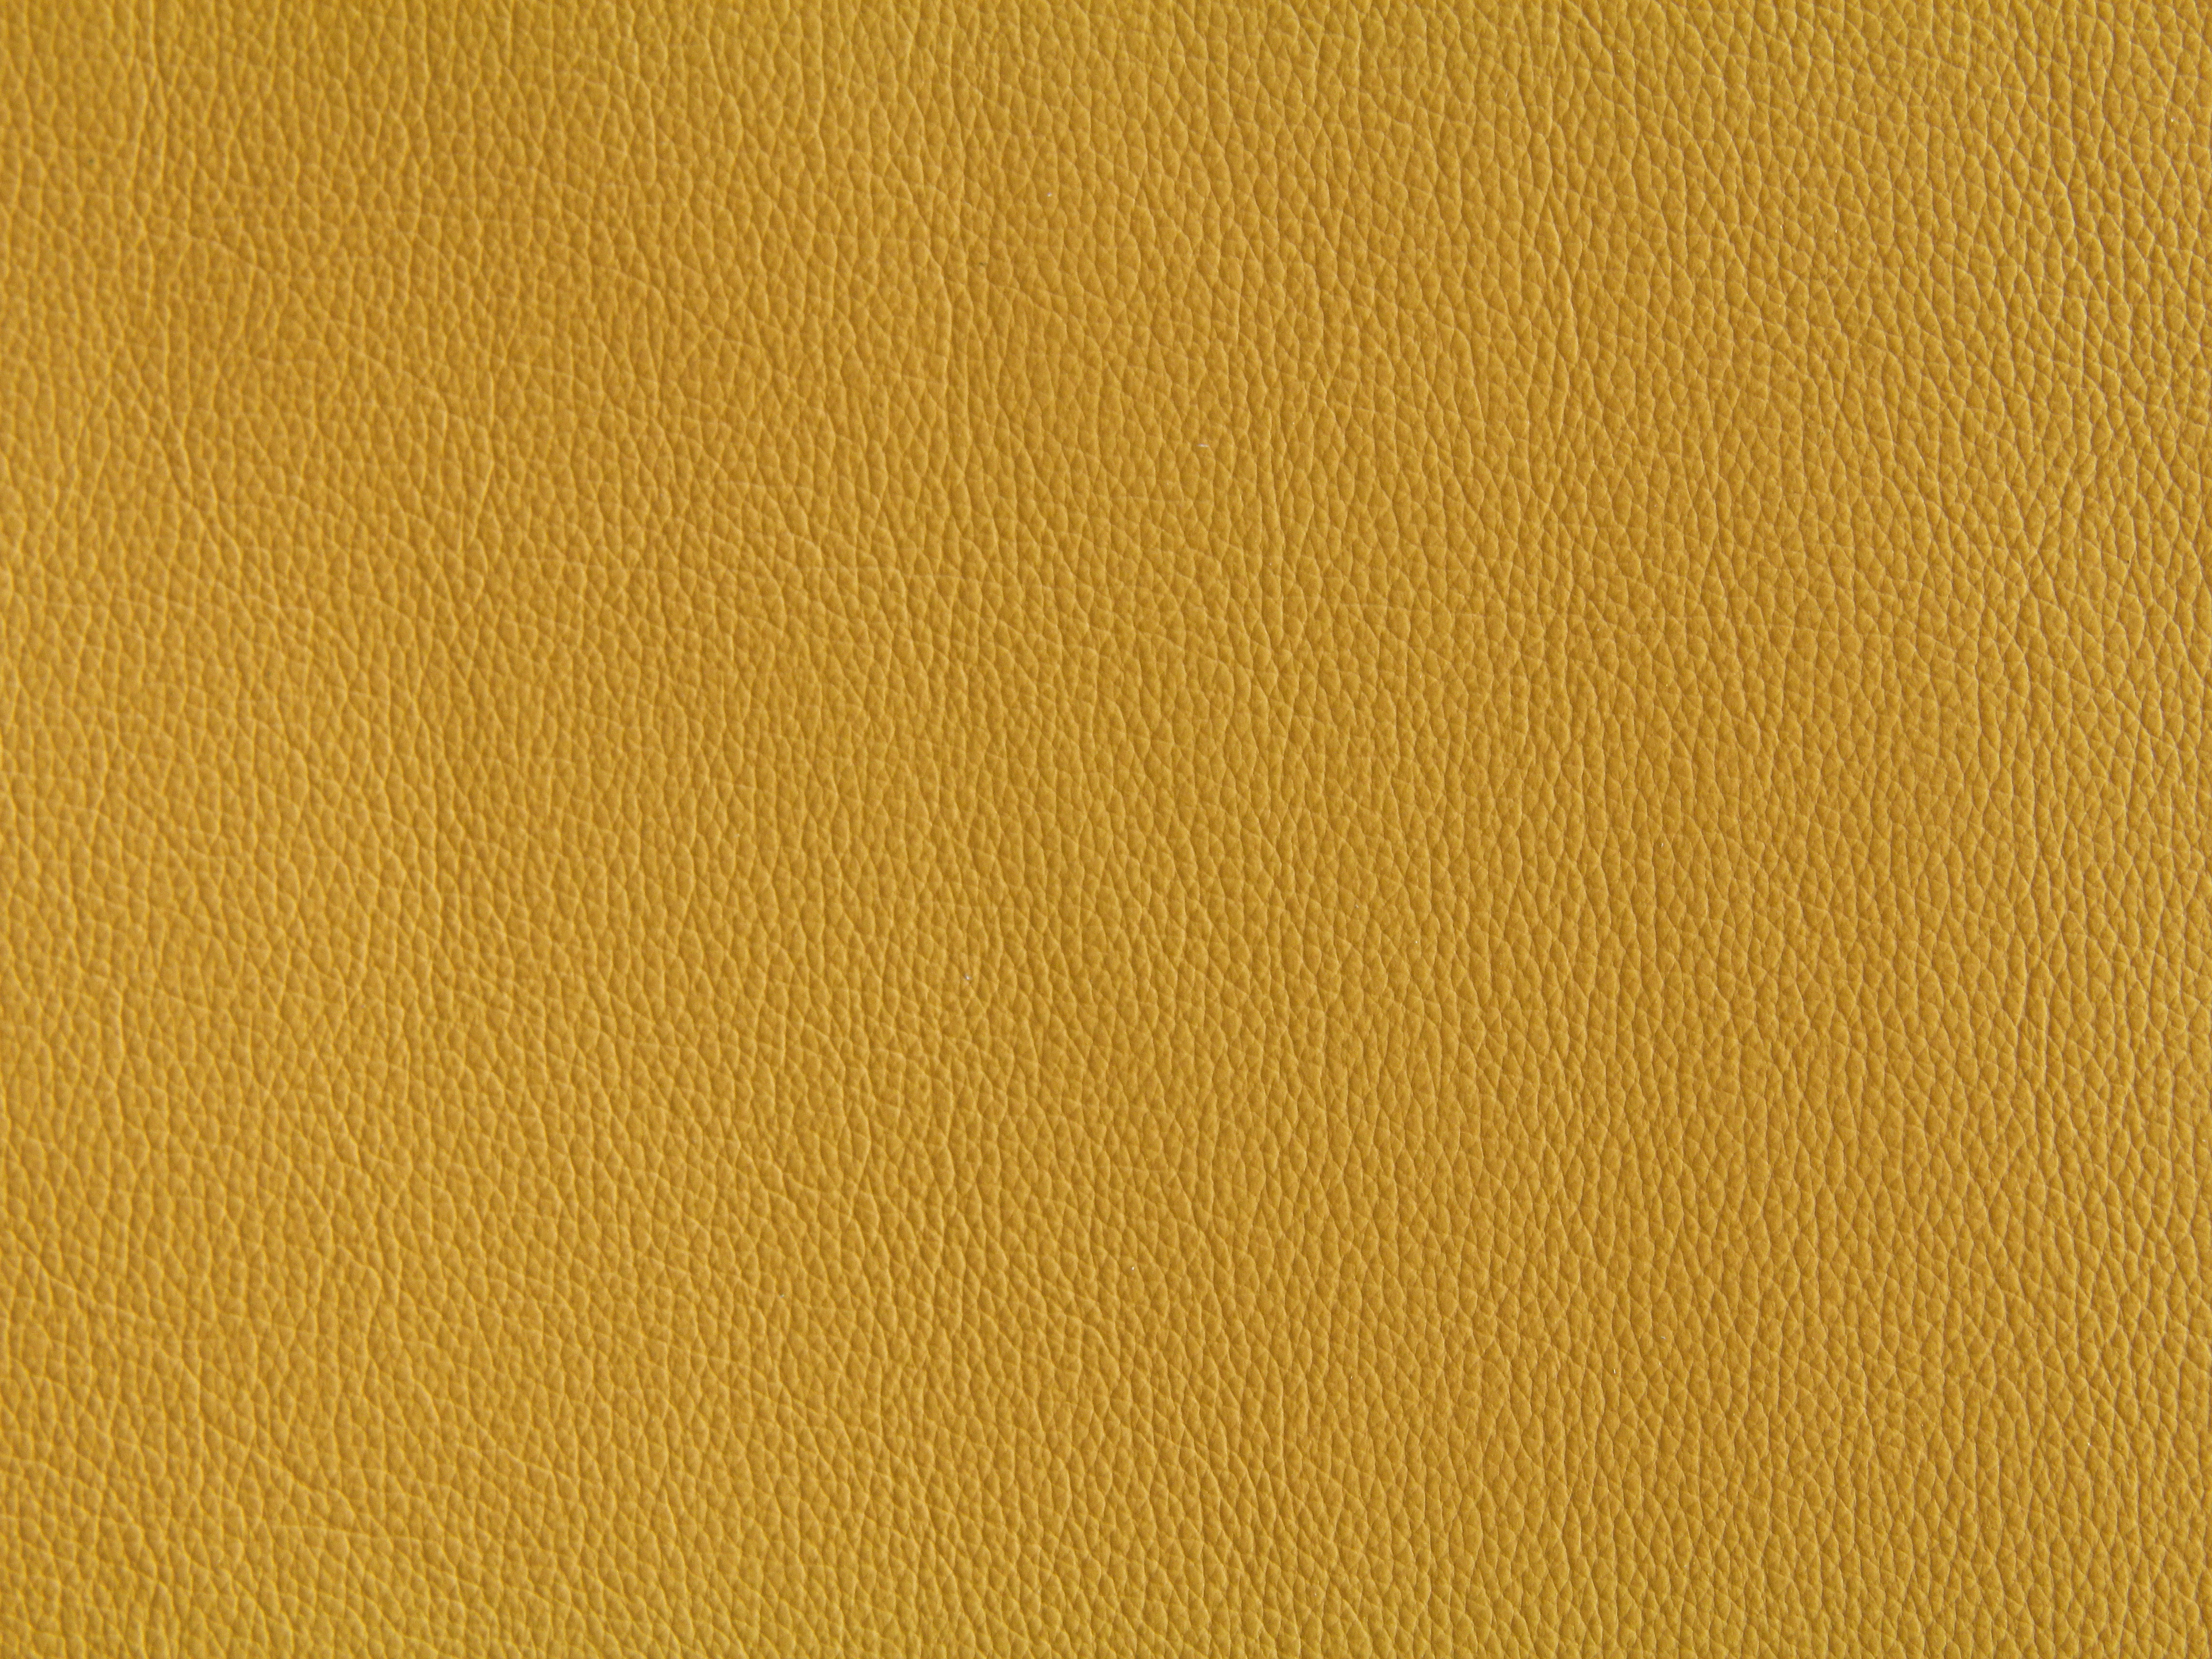 Yellow Texture Wallpapers